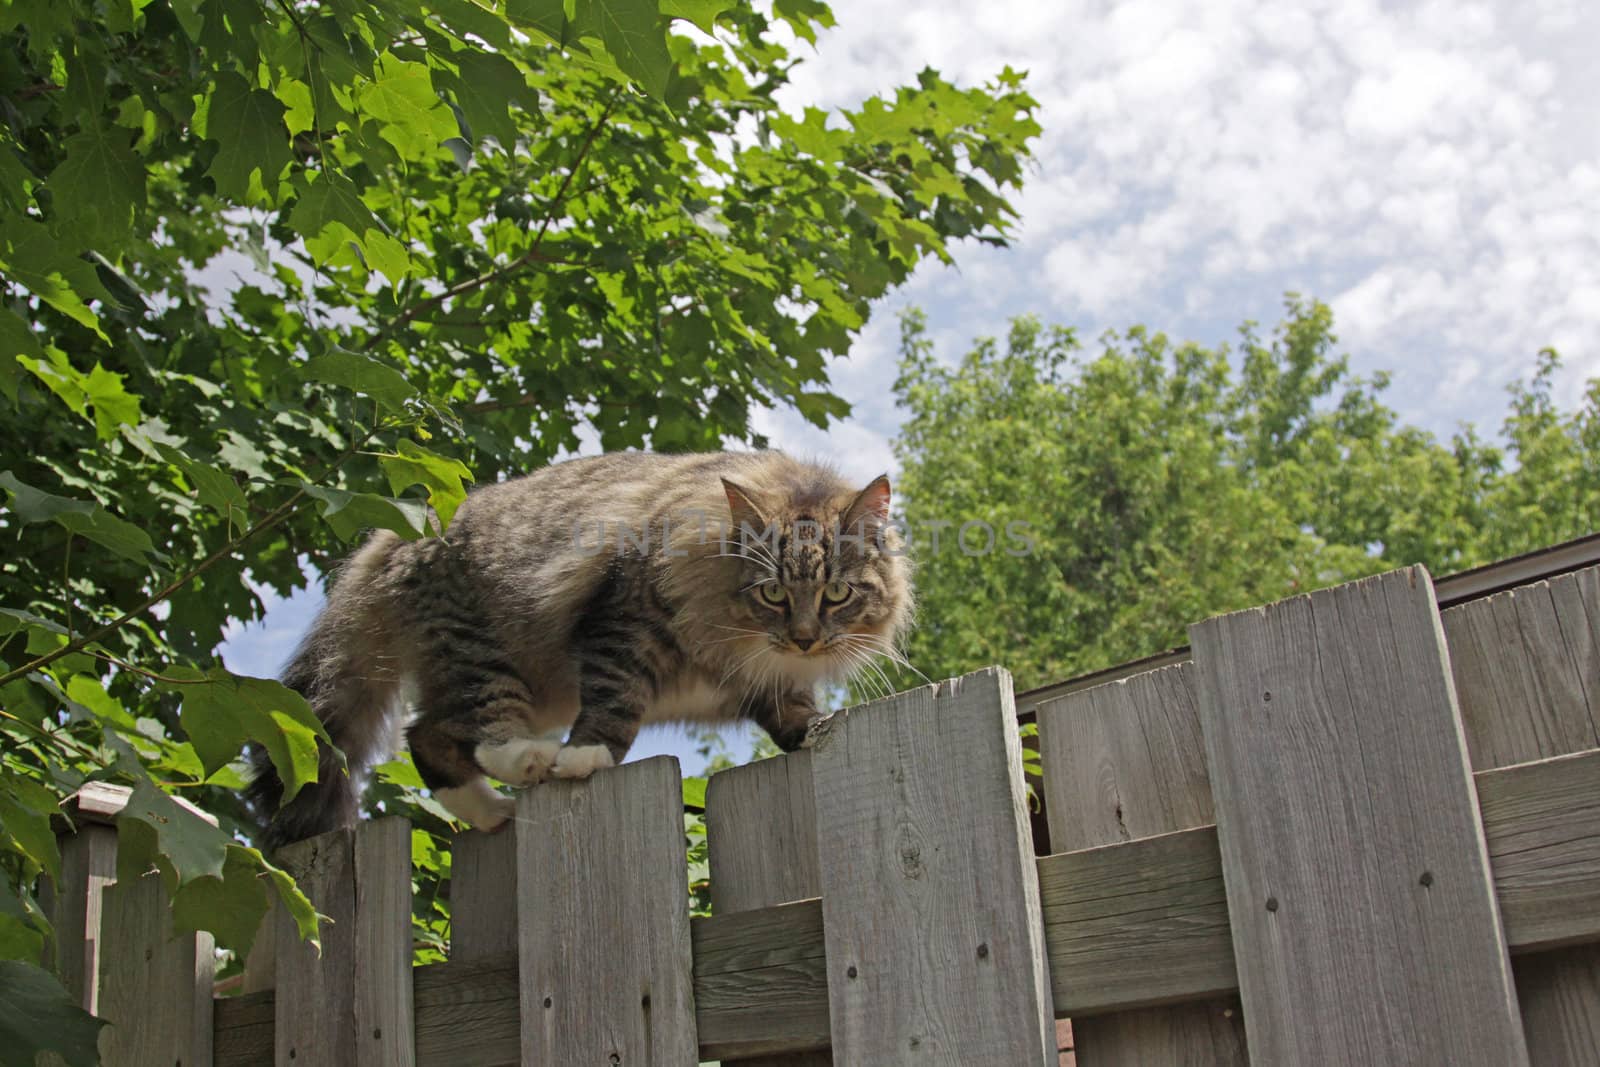 Prowling Cat on Fence by ca2hill